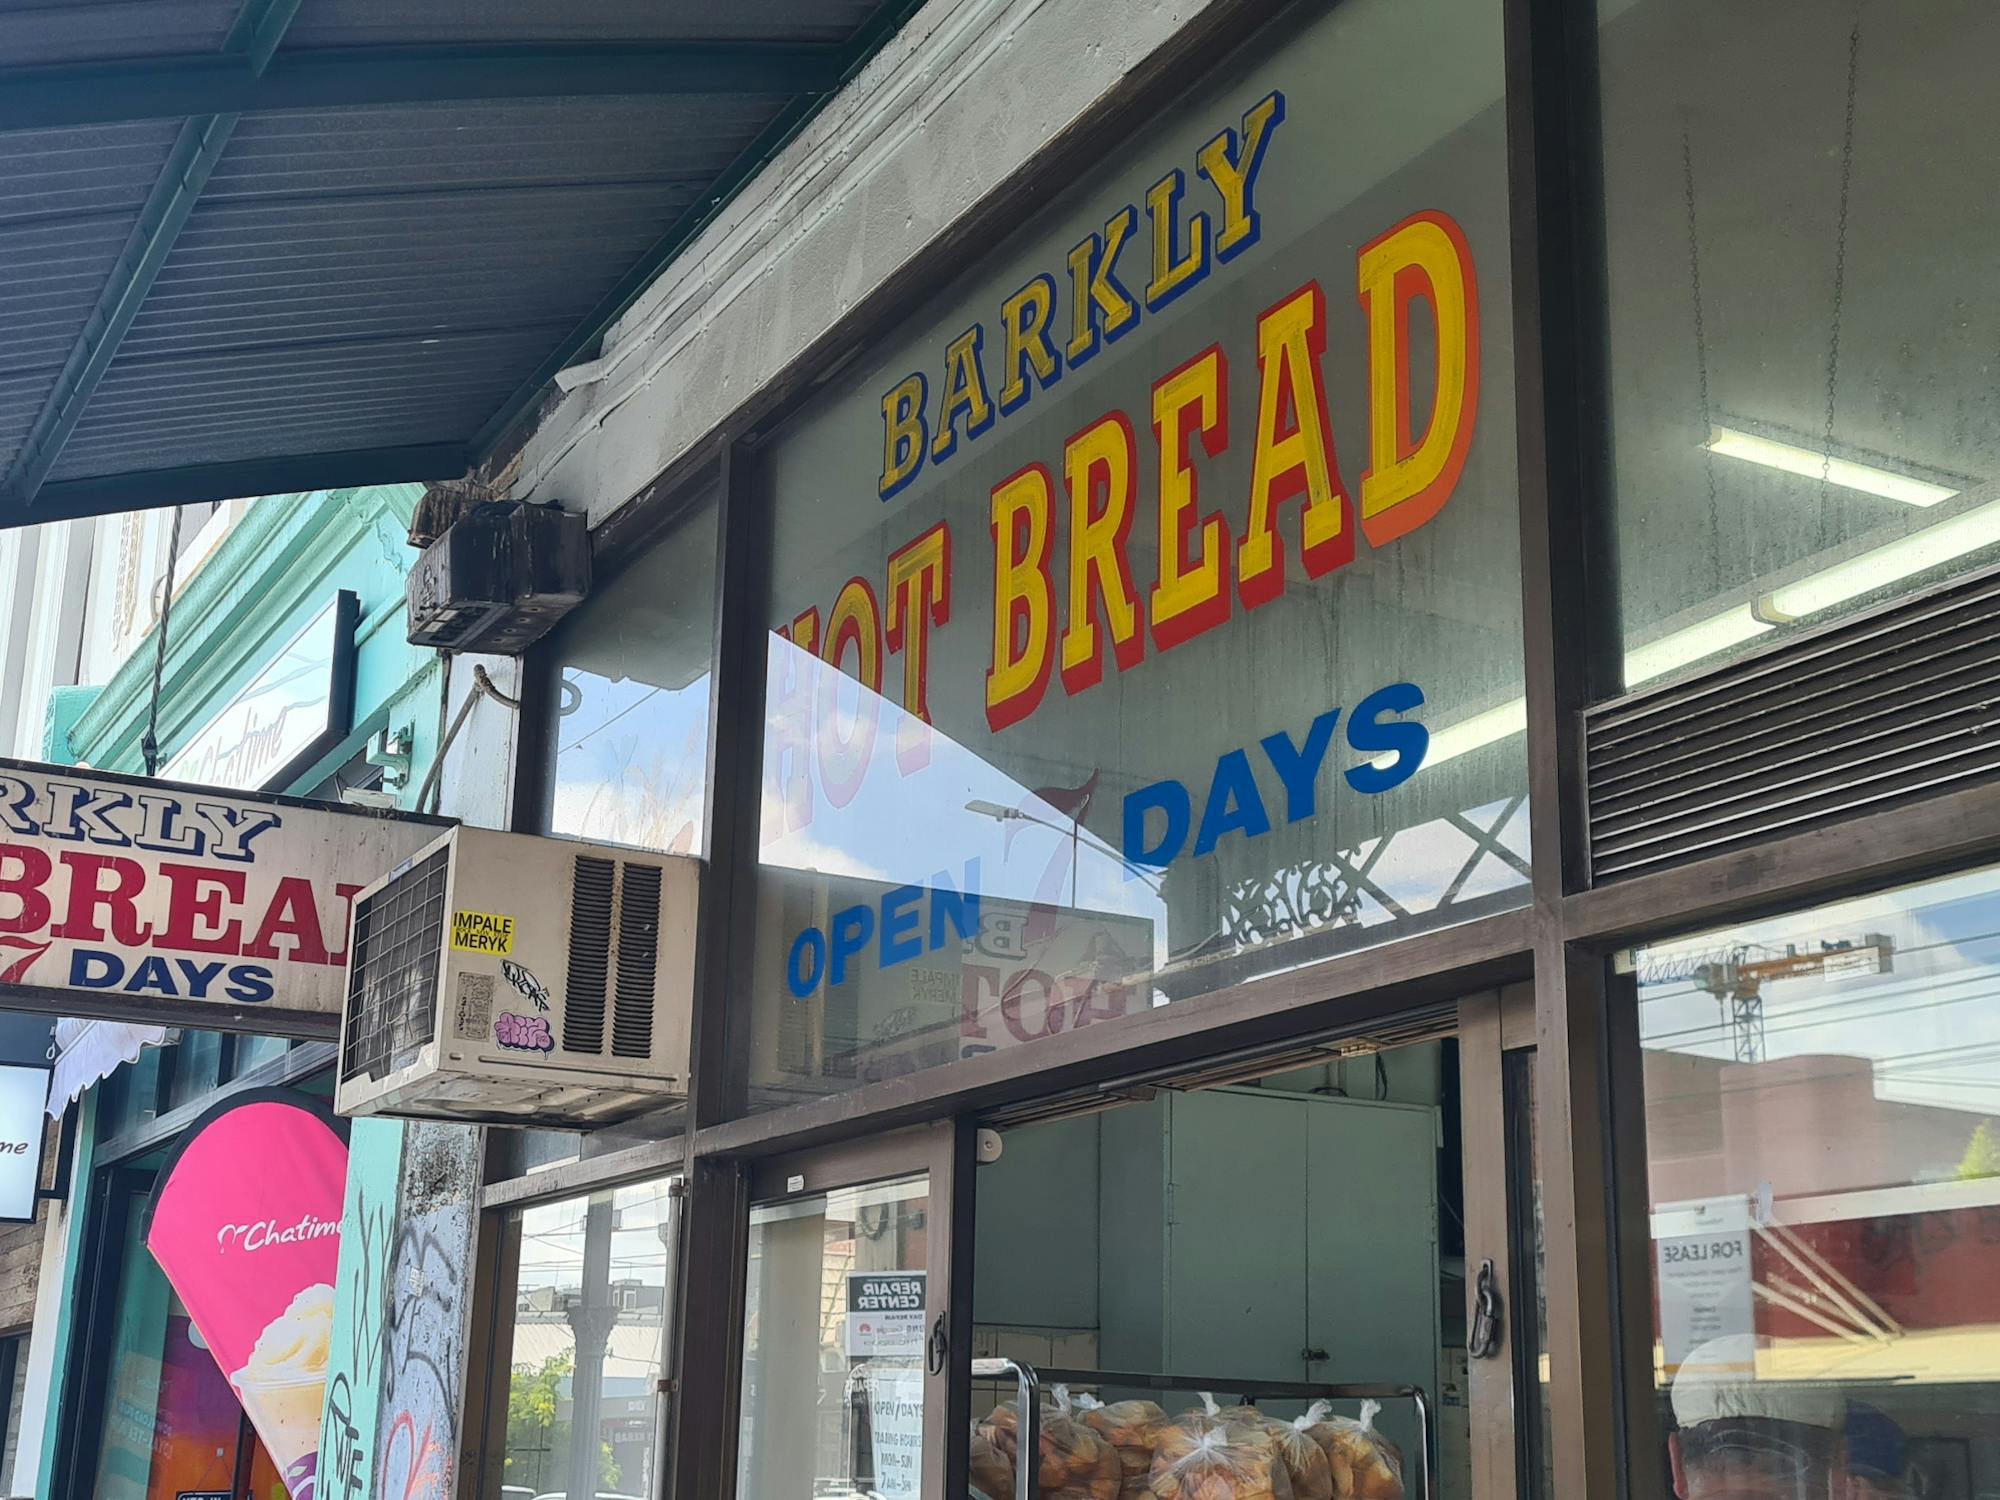 Bakery shop front showing a sign denoting 'open 7 days'